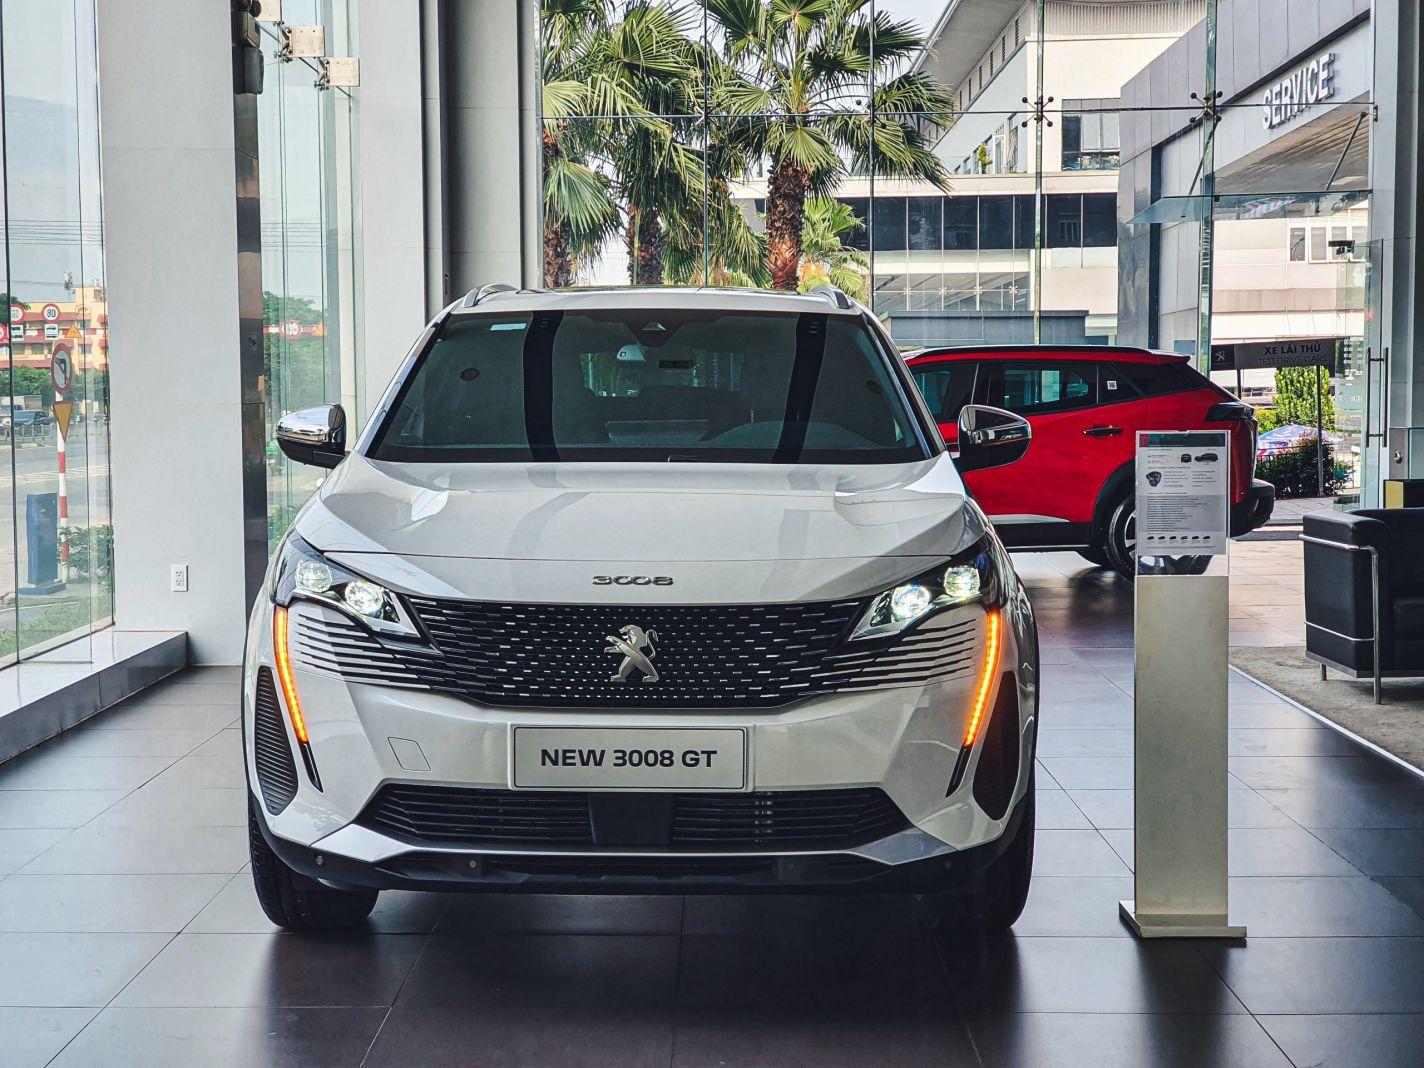 1 XE DUY NHẤT – NEW PEUGEOT 3008 GT TRẮNG SẴN XE GIAO NGAY